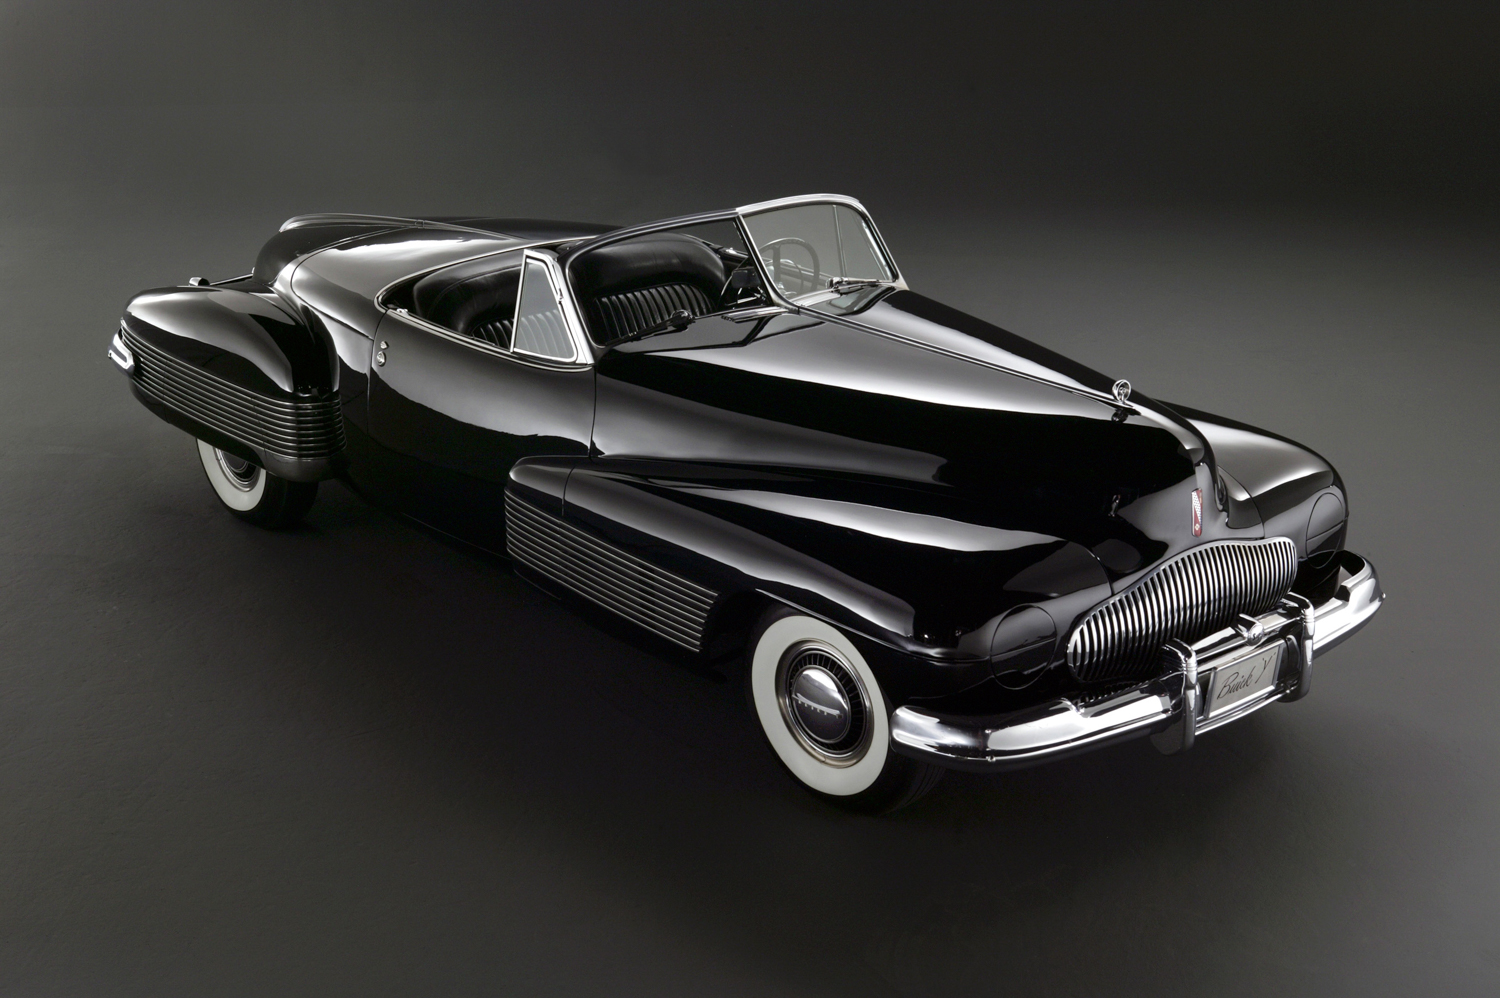 1938 Buick Y Job, penned by famed designer Harley Earl, is known today as the first concept car ever created. 